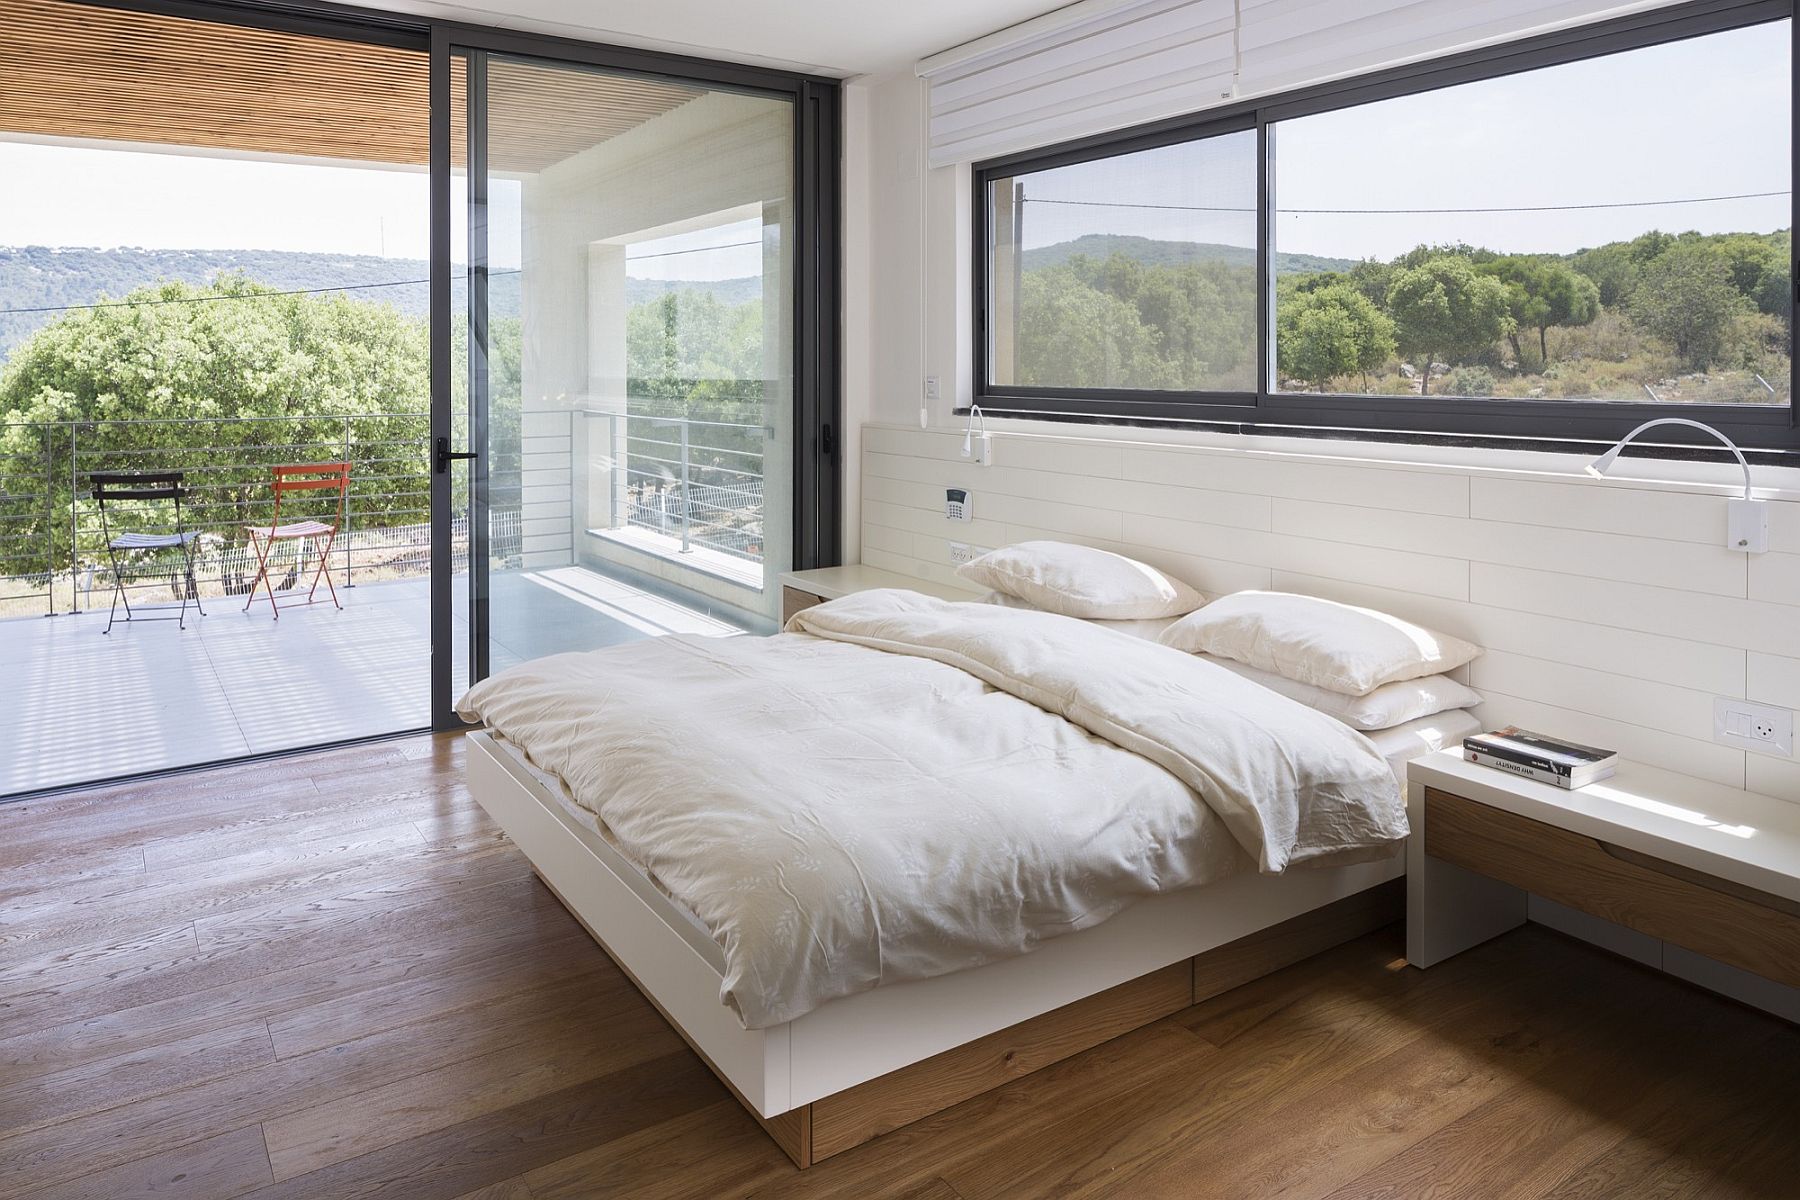 Master bedroom and deck outside with unabated views of the scenery outside